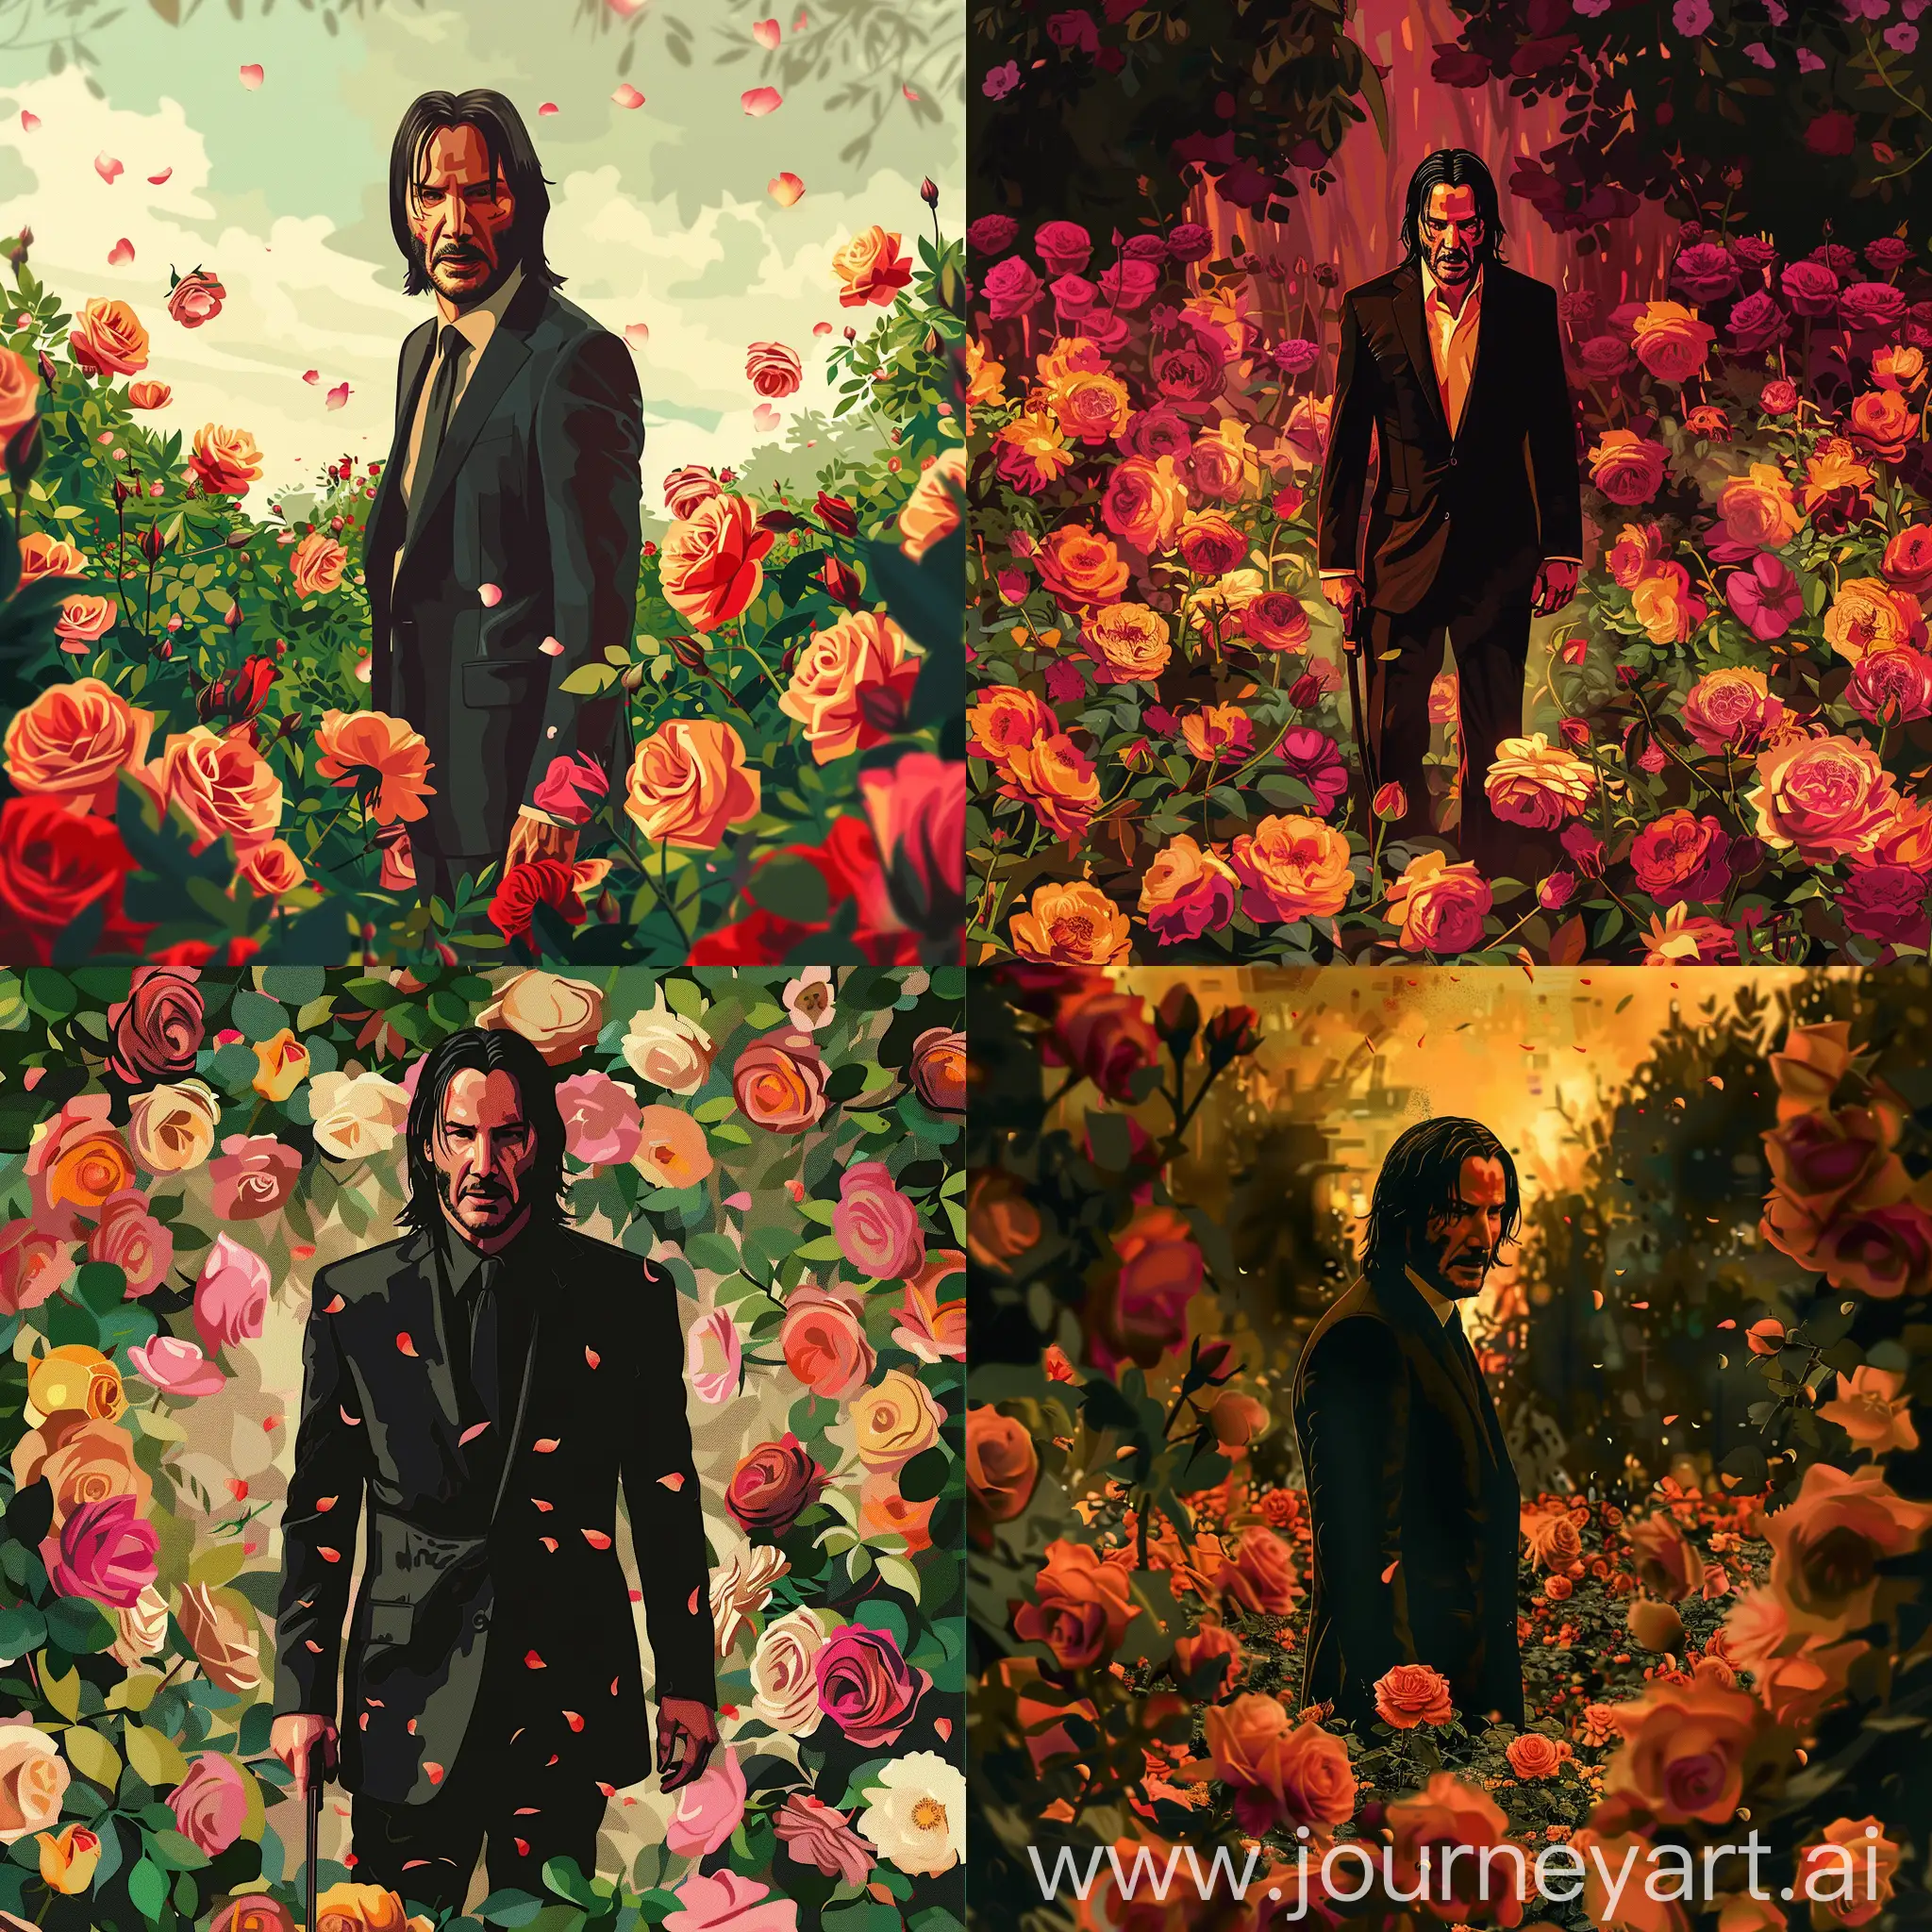 Unrealistic realistic keanu reeves as john wick standing in a garden of roses vector dreamy and illustration photo with flat colors and warm colors